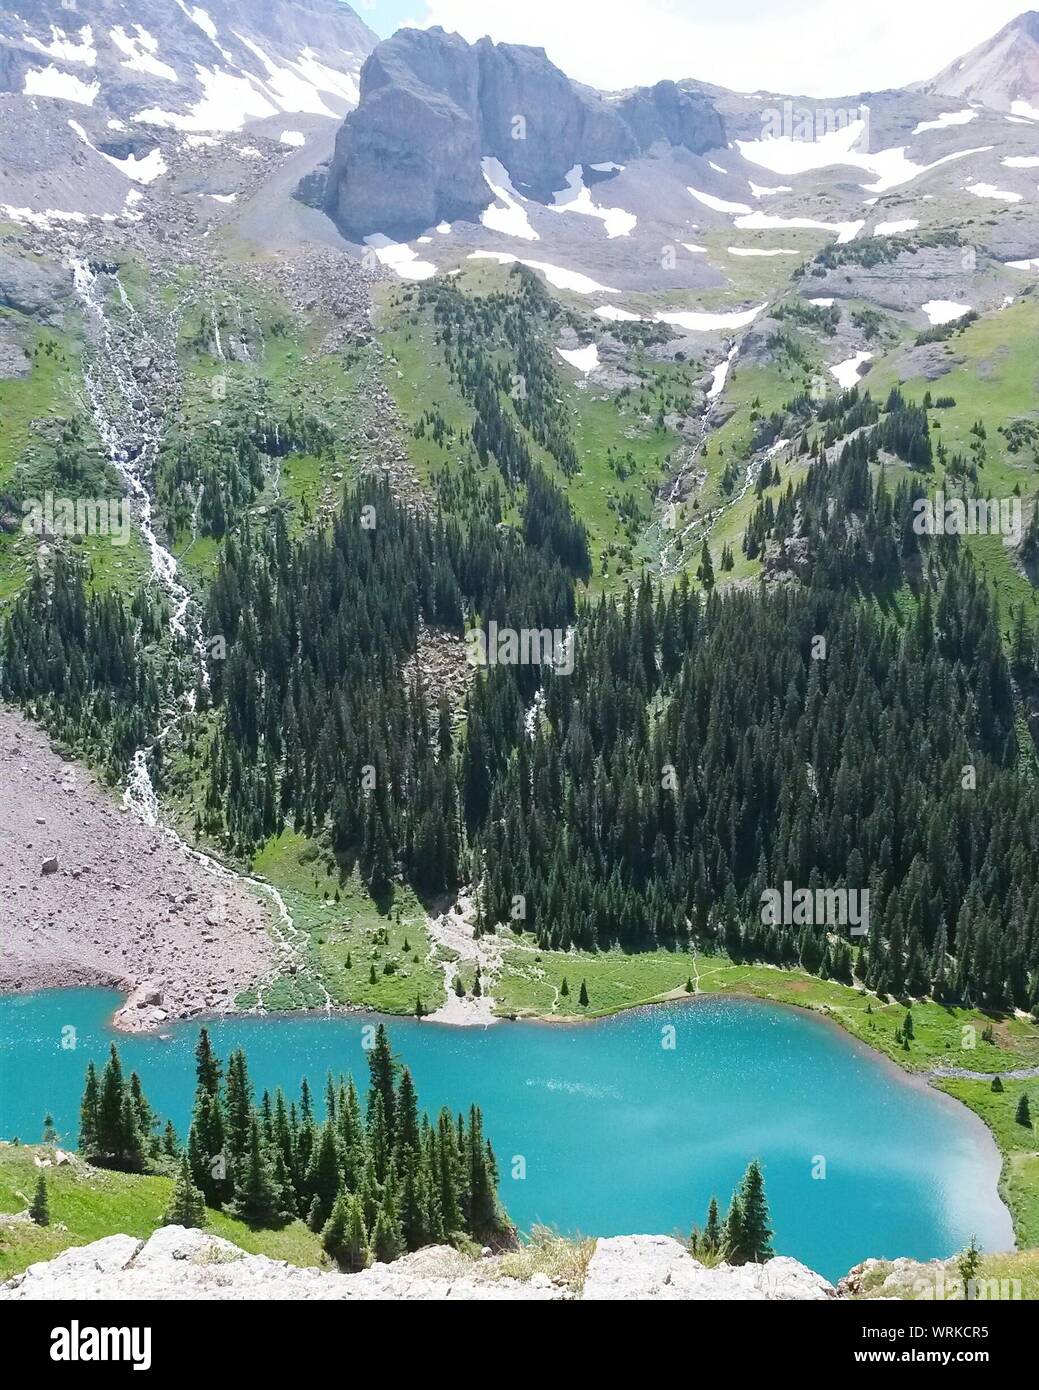 Scenic View Of Lower Blue Lake By Landscape Stock Photo